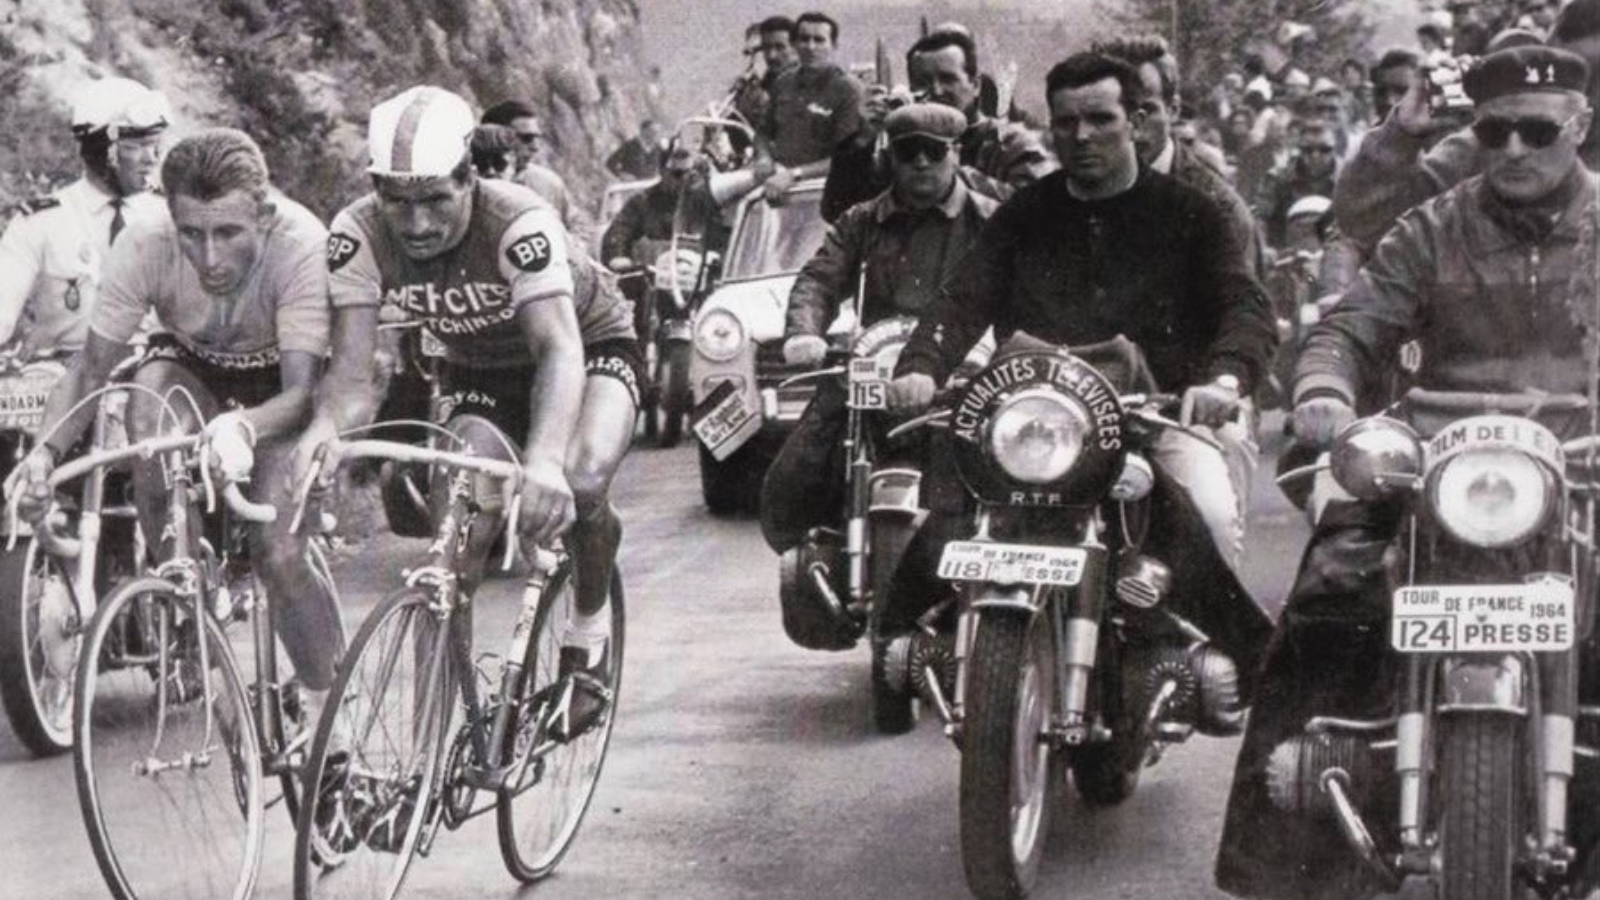 Iconic cycling images and iconic cycling places: Jacques Anquetil and Raymond Poulidor on the Puy de Dôme in 1964